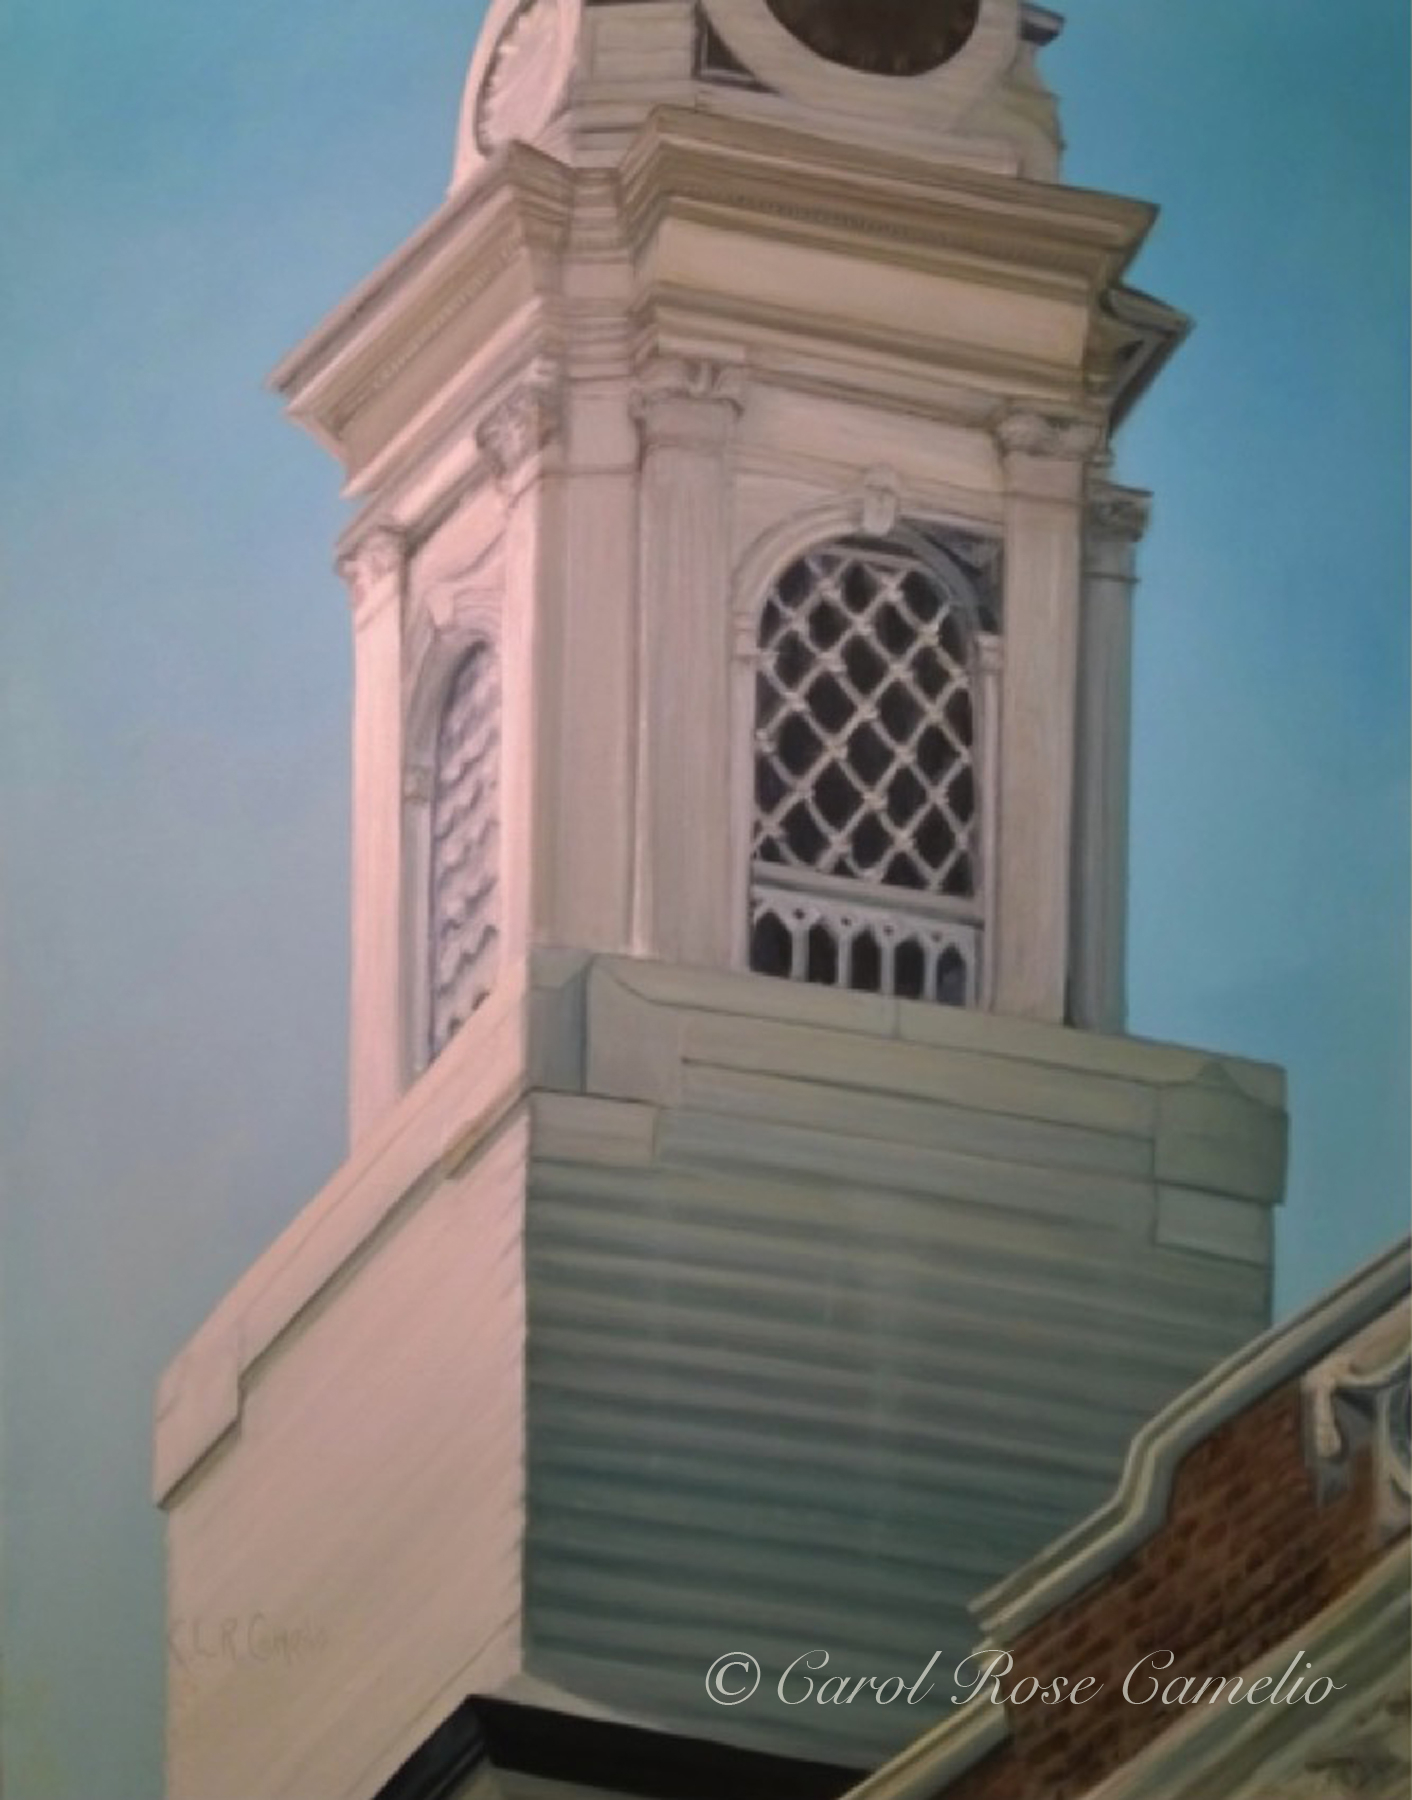 Church Tower: A white-washed wooden church tower, with a window and clock, on a sunny day.